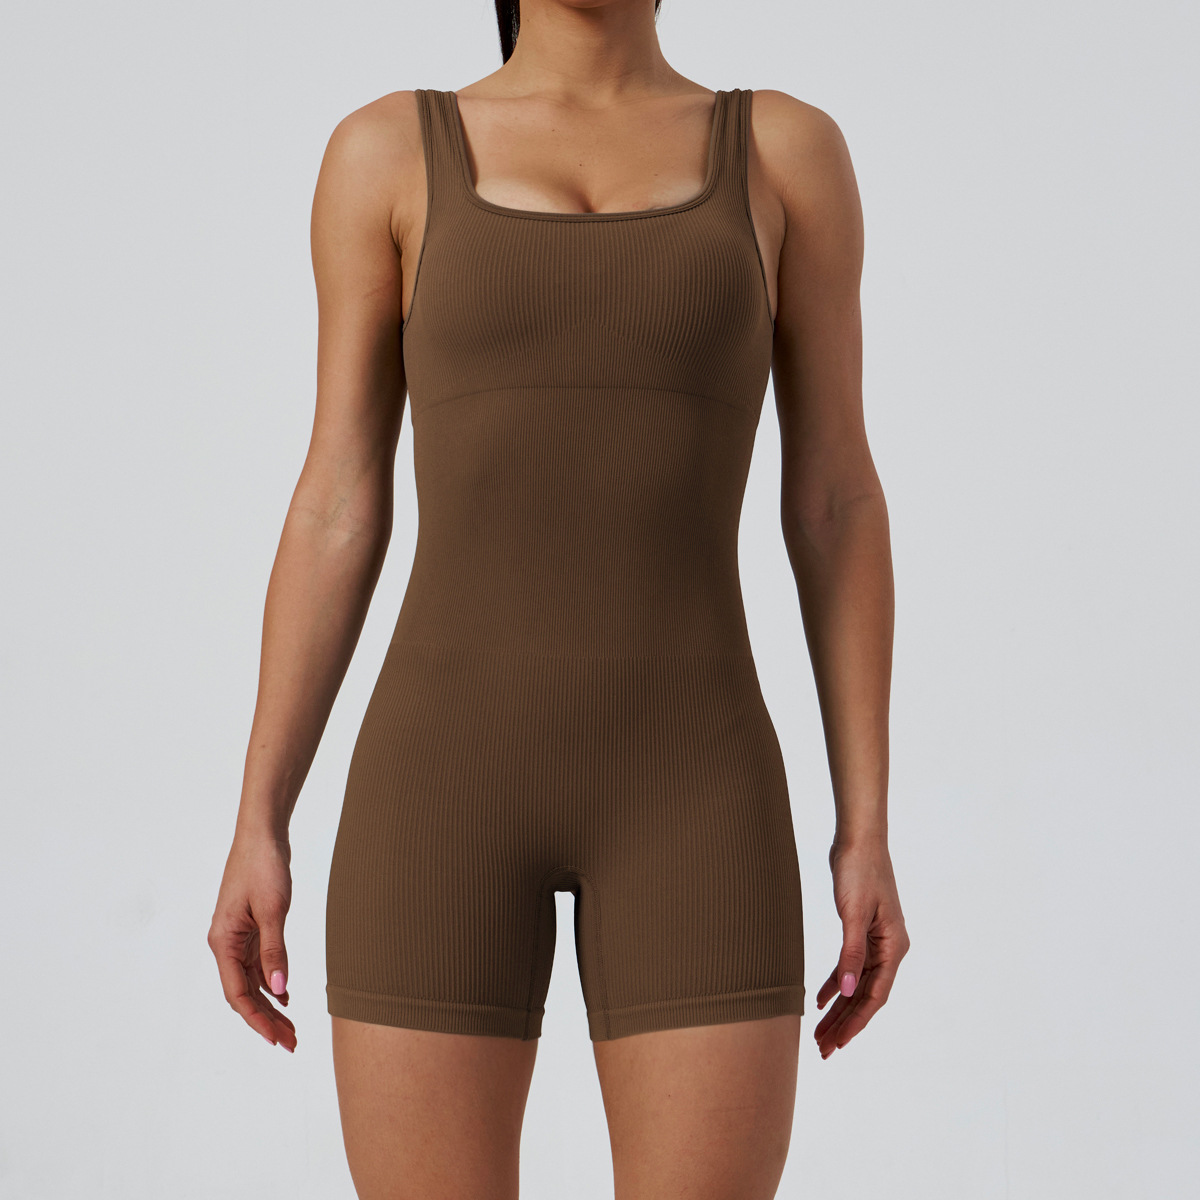 G9282--Seamless One-piece Yoga Wear Sand-washed Square Neck Jumpsuit